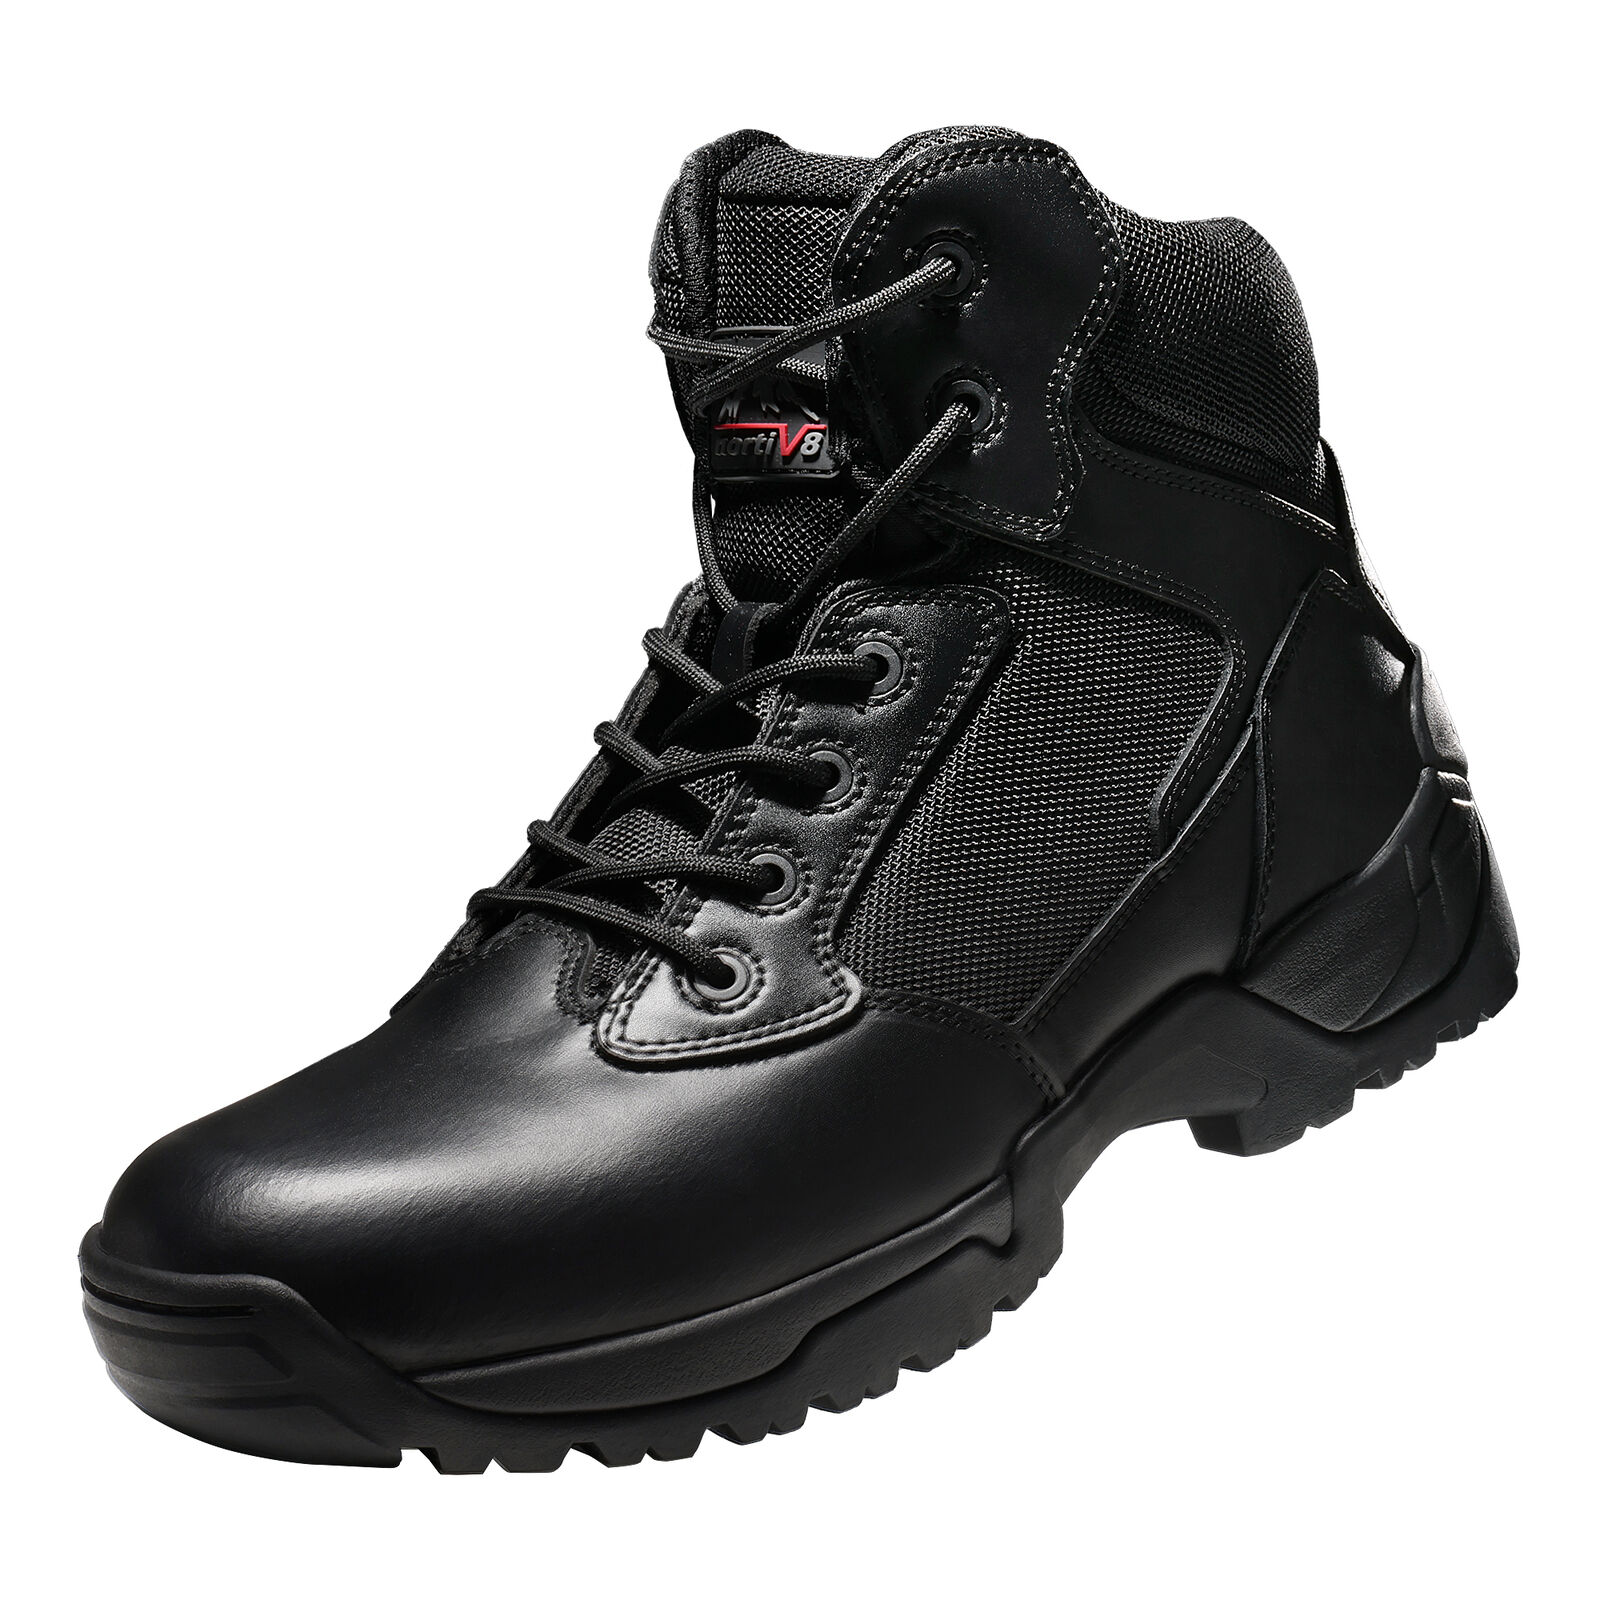 NORTIV 8 Men's Military Tactical Boots Motorcycle Combat Ankle High Work Shoes